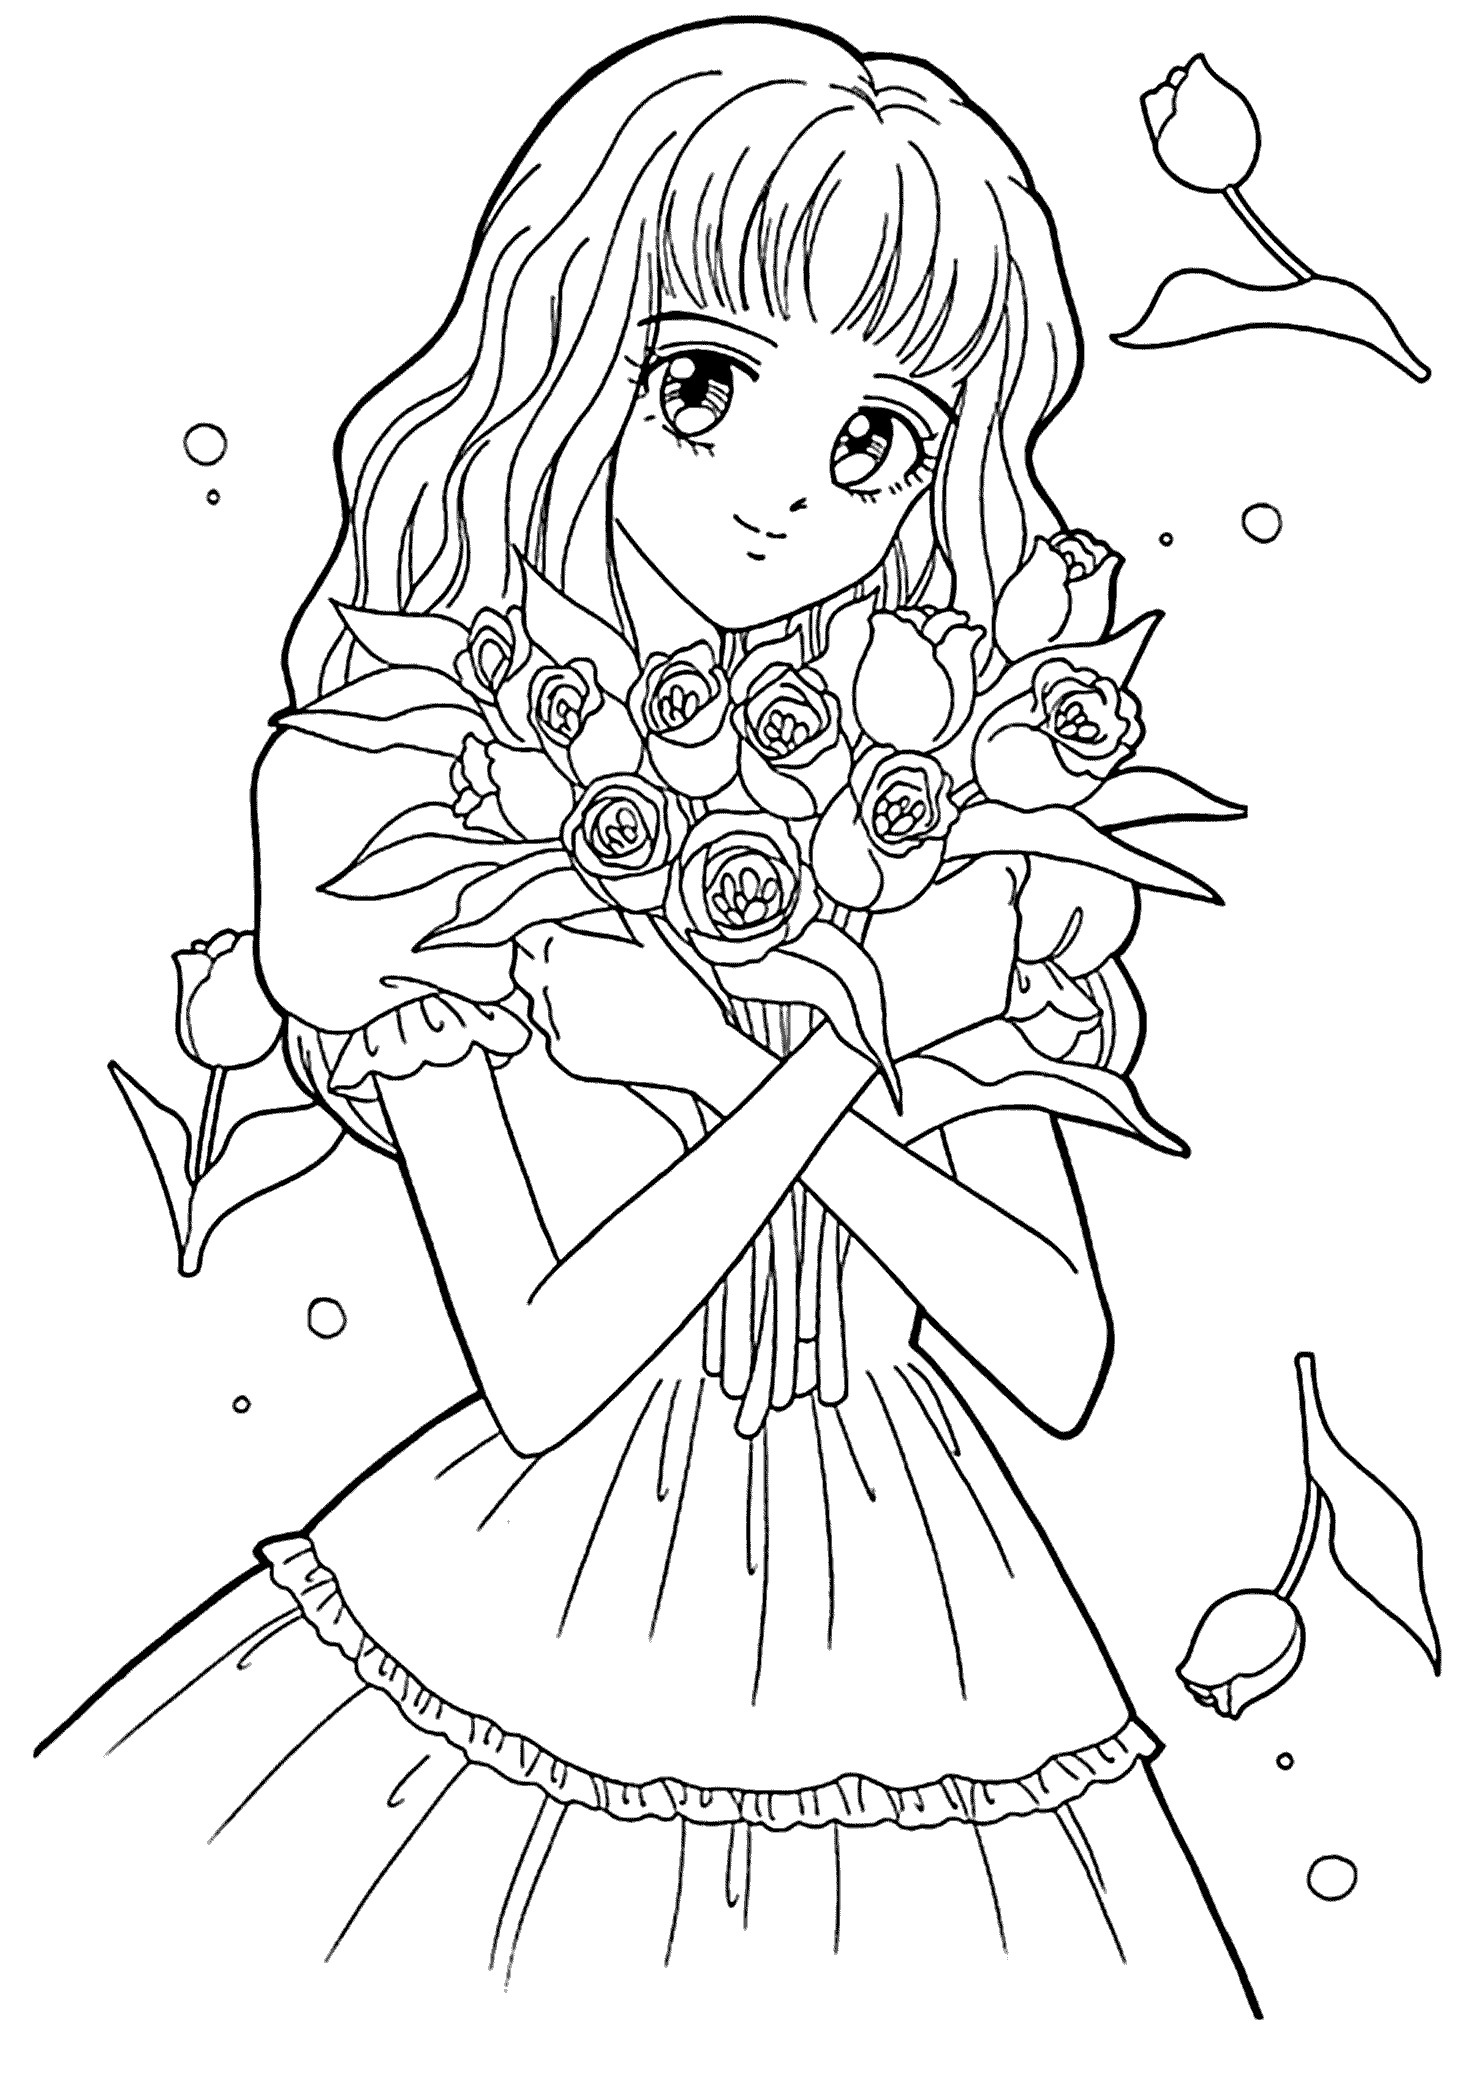 Anime Coloring Pages For Teens
 13 Best of Anime Girl Coloring Pages Bestofcoloring